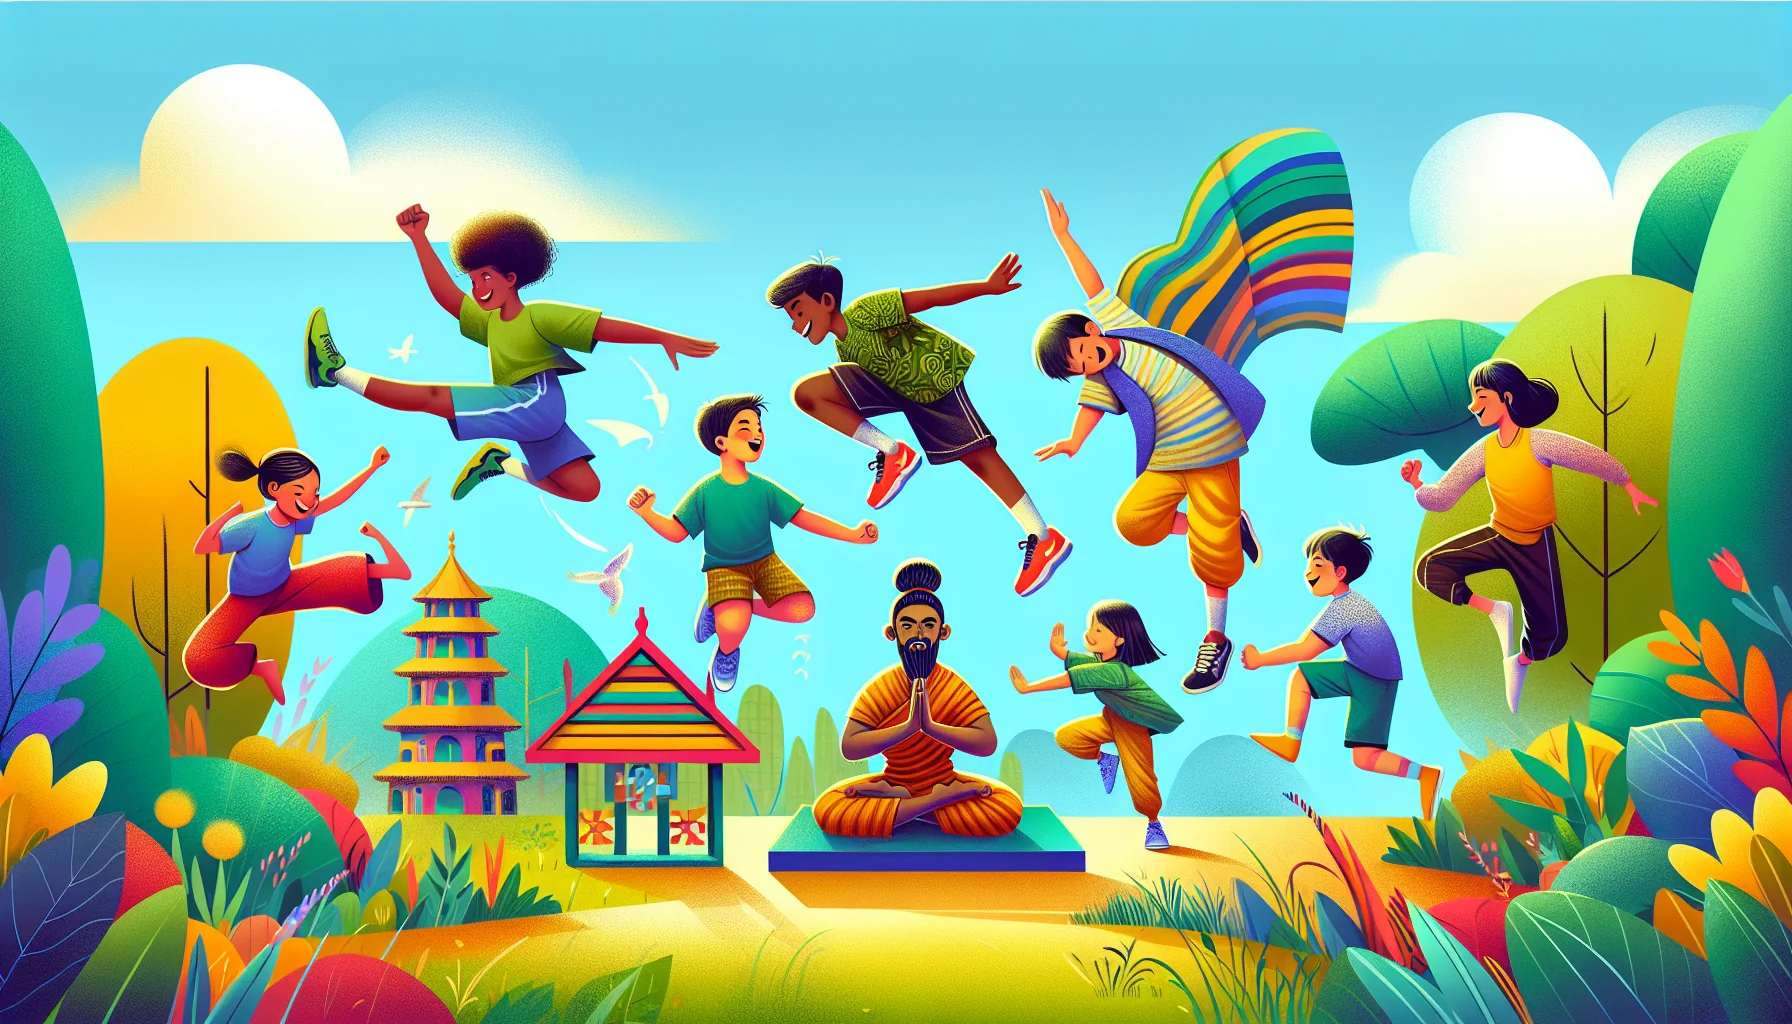 Create a whimsically colorful and joyous scene capturing a diverse group of kids performing calisthenics exercises outdoors. There is a Caucasian boy doing jumping jacks, an African girl indulged in a playful plank position, a South Asian girl theatrically folding into a bridge pose and a Middle Eastern boy amusingly attempting a wall sit with a giddy look on his face. The background consists of bright blue skies and lush green foliage. The image should inspire onlookers with a sense of cheerful health enthusiasm.